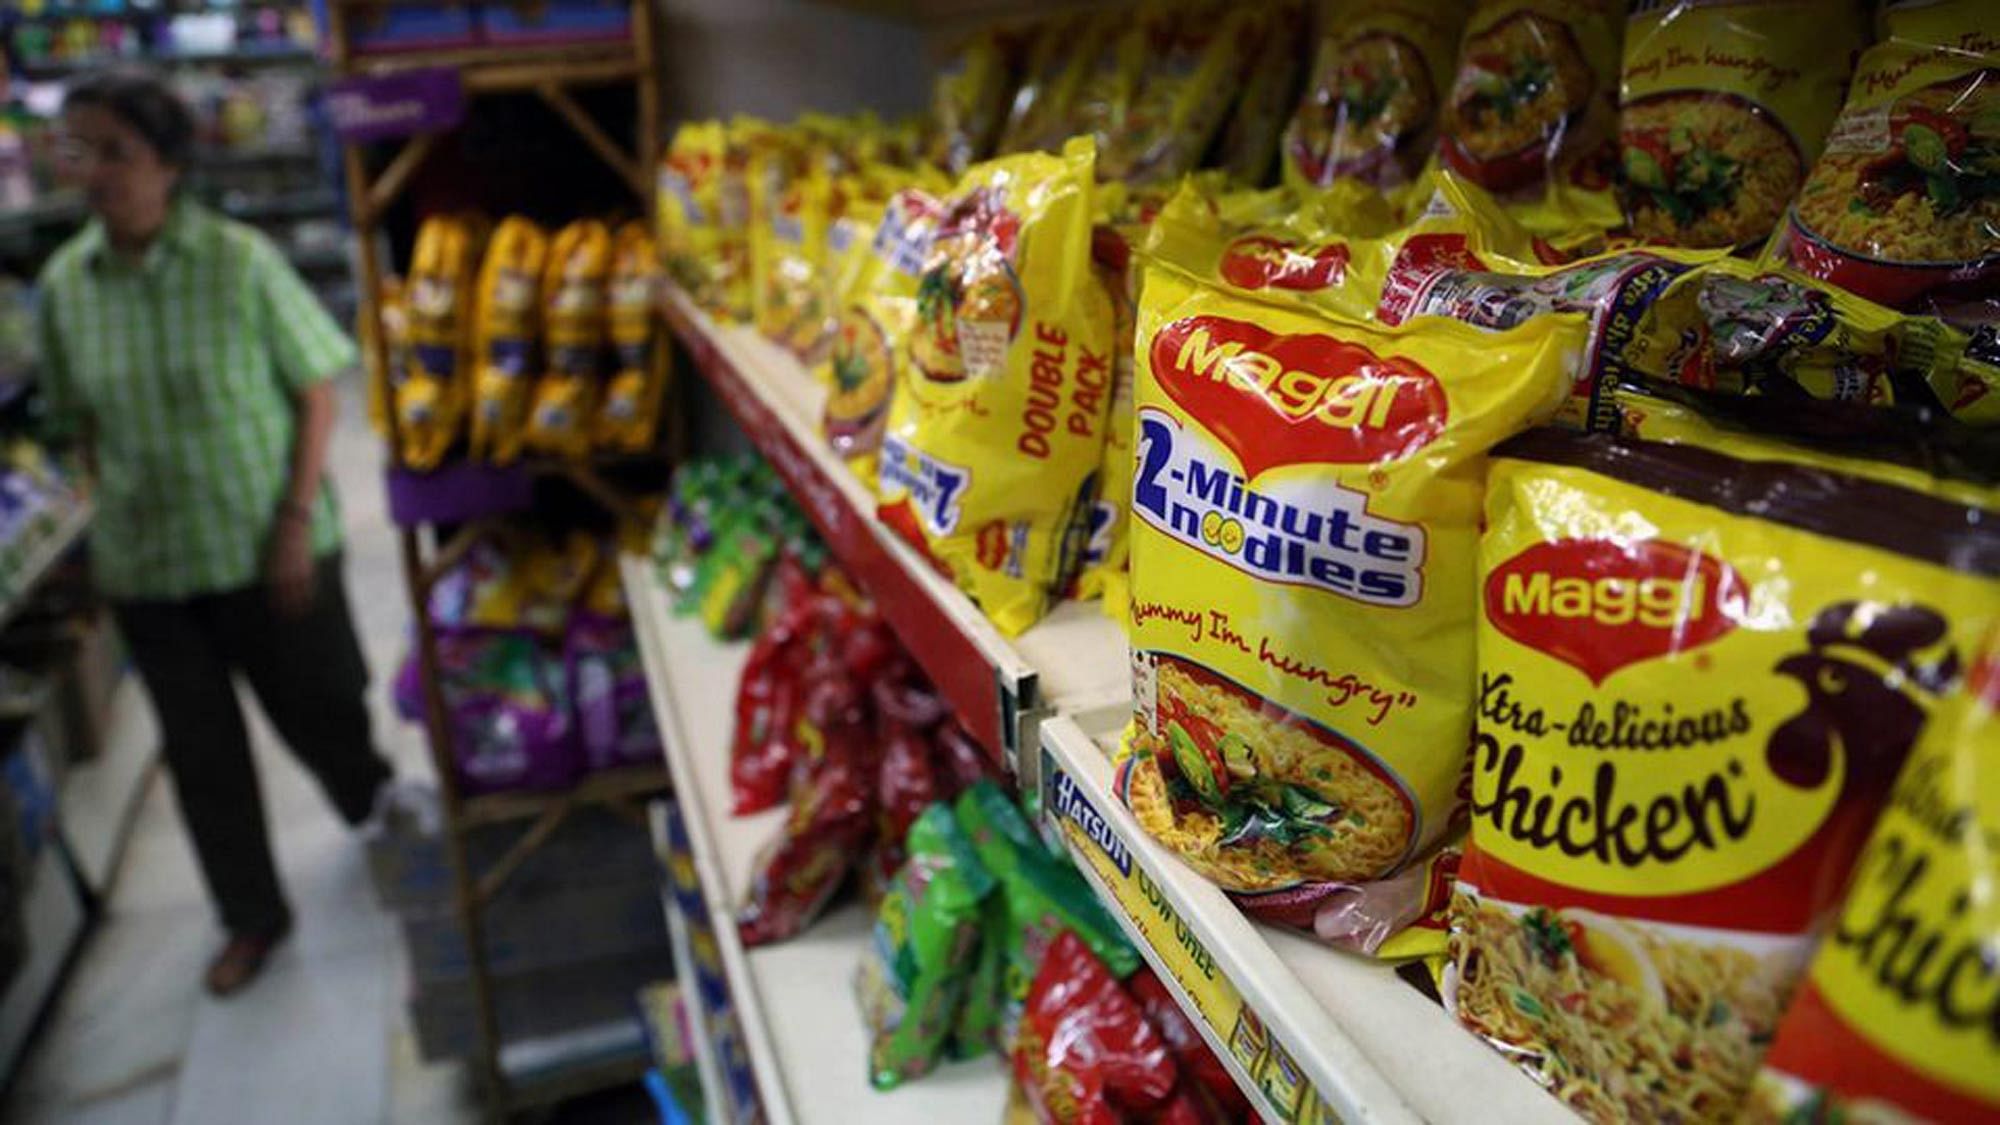 Packets of Maggi noodles on the shelves before the ban. (Photo: AP)